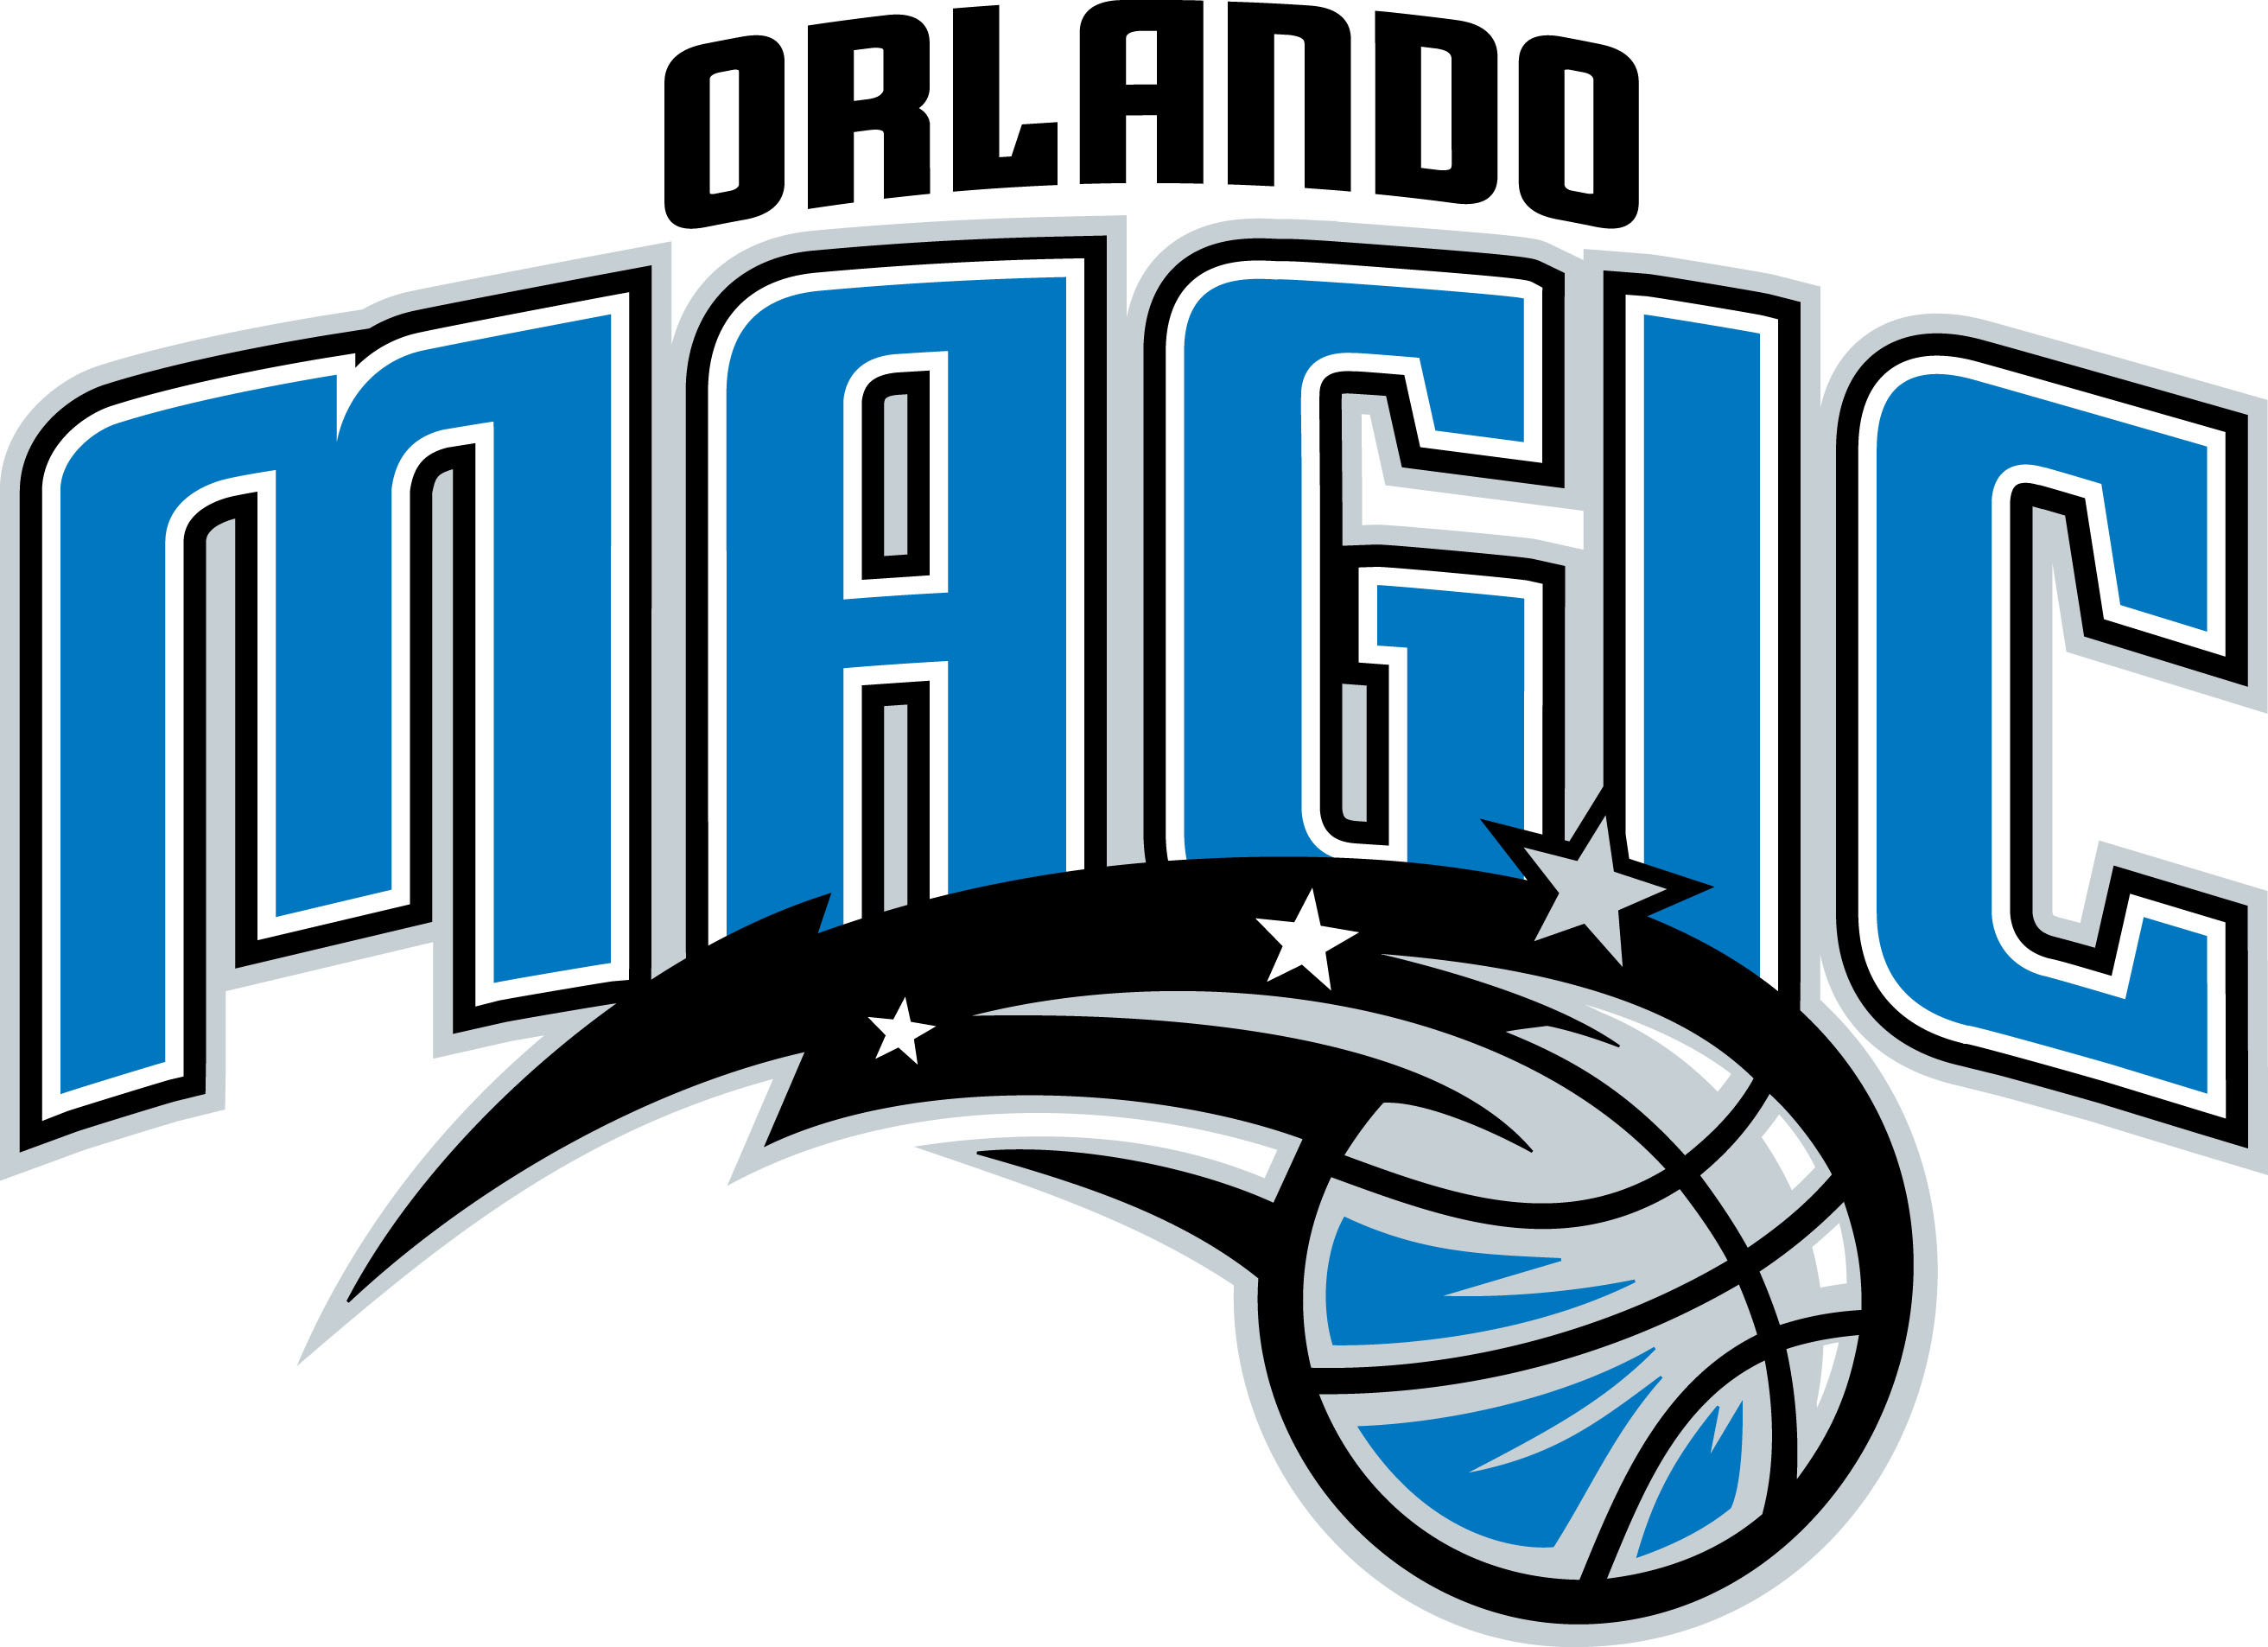 2625x1906 Cool Collections of Orlando Magic Wallpapers HDFor Desktop, Laptop and  Mobiles. Here You Can Download More than 5 Million Photography collections  Uploaded ...